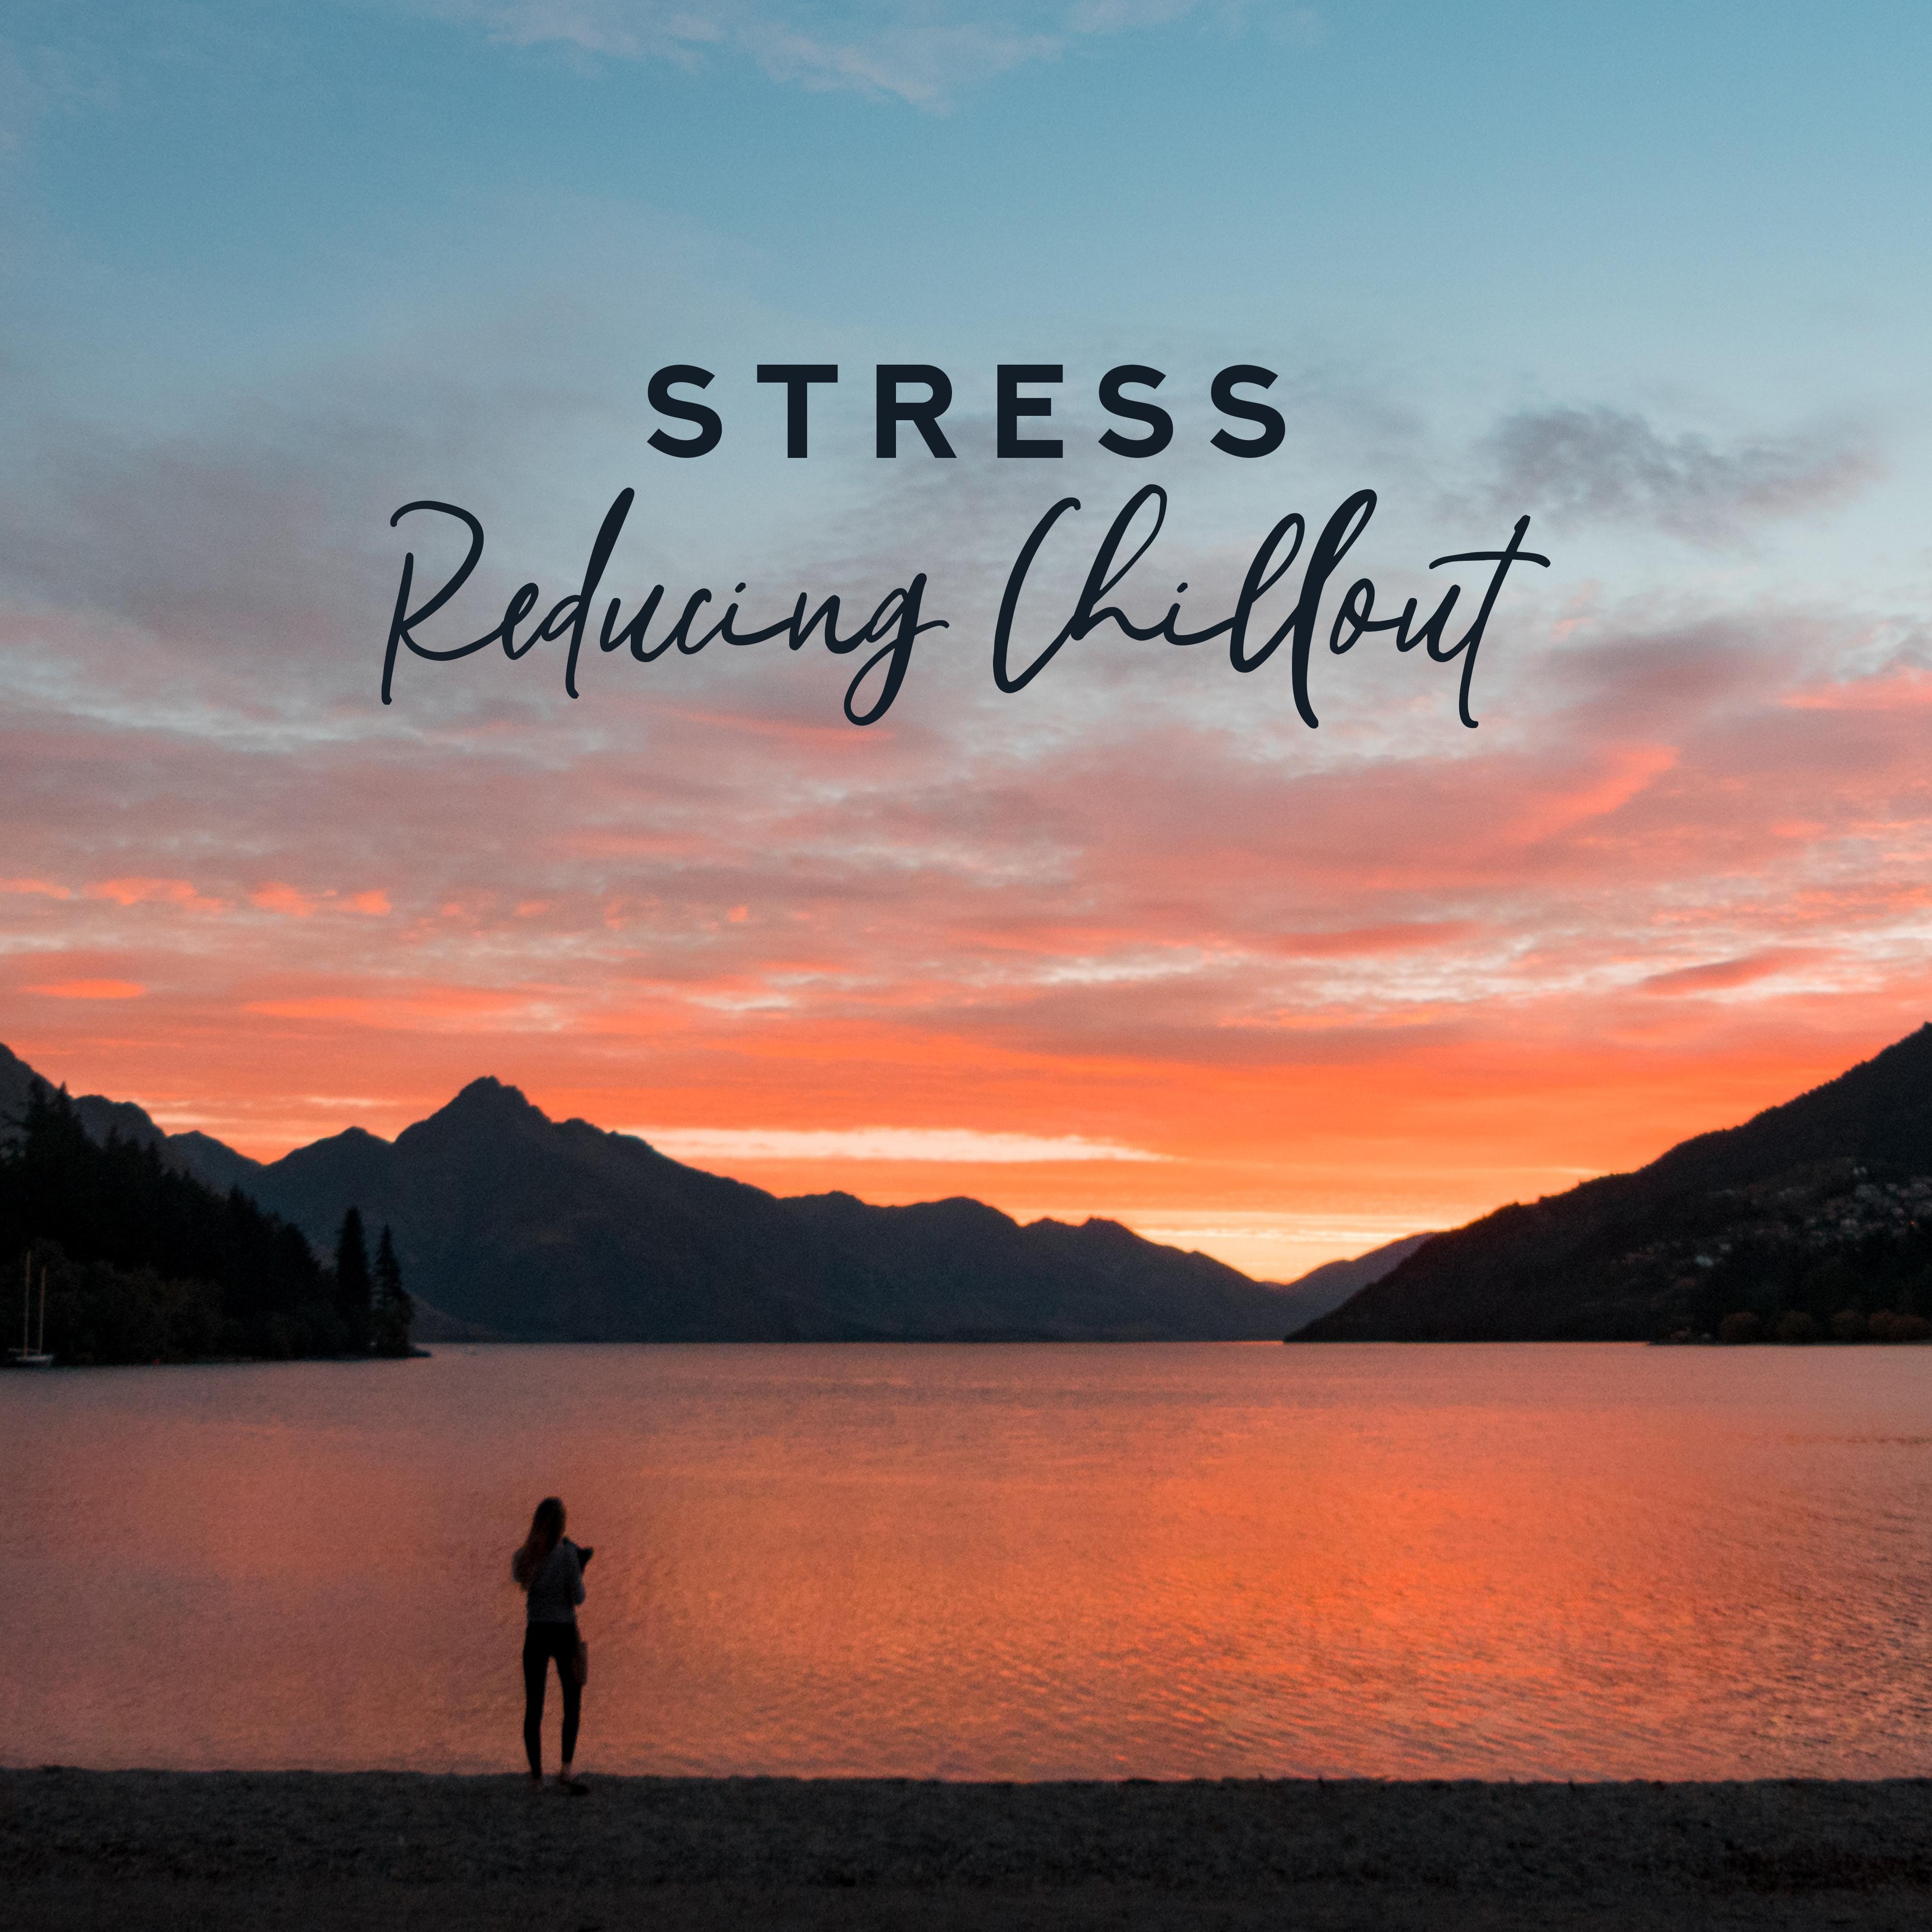 Stress Reducing Chillout - 15 Songs That Help to Relax, Unwind and Rest